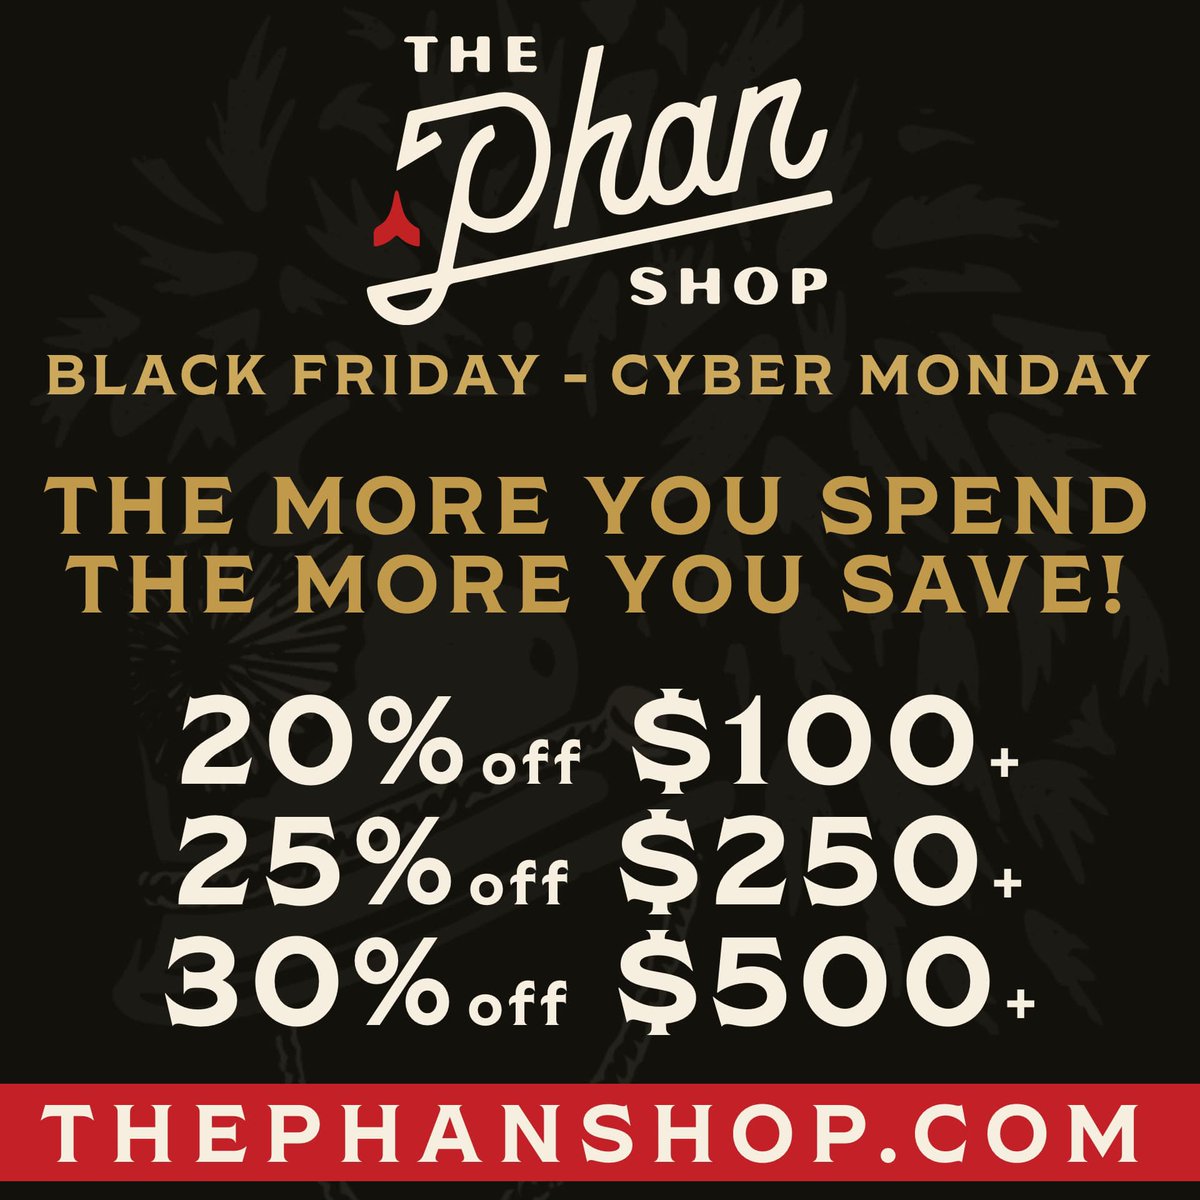 Our Black Friday-Cyber Monday sale is on at thephanshop.com! From the Basics Black Collection to our fresh roasted coffees, the more you spend, the more you save. AND you will be supporting Phantom Regiment's mission with every purchase!